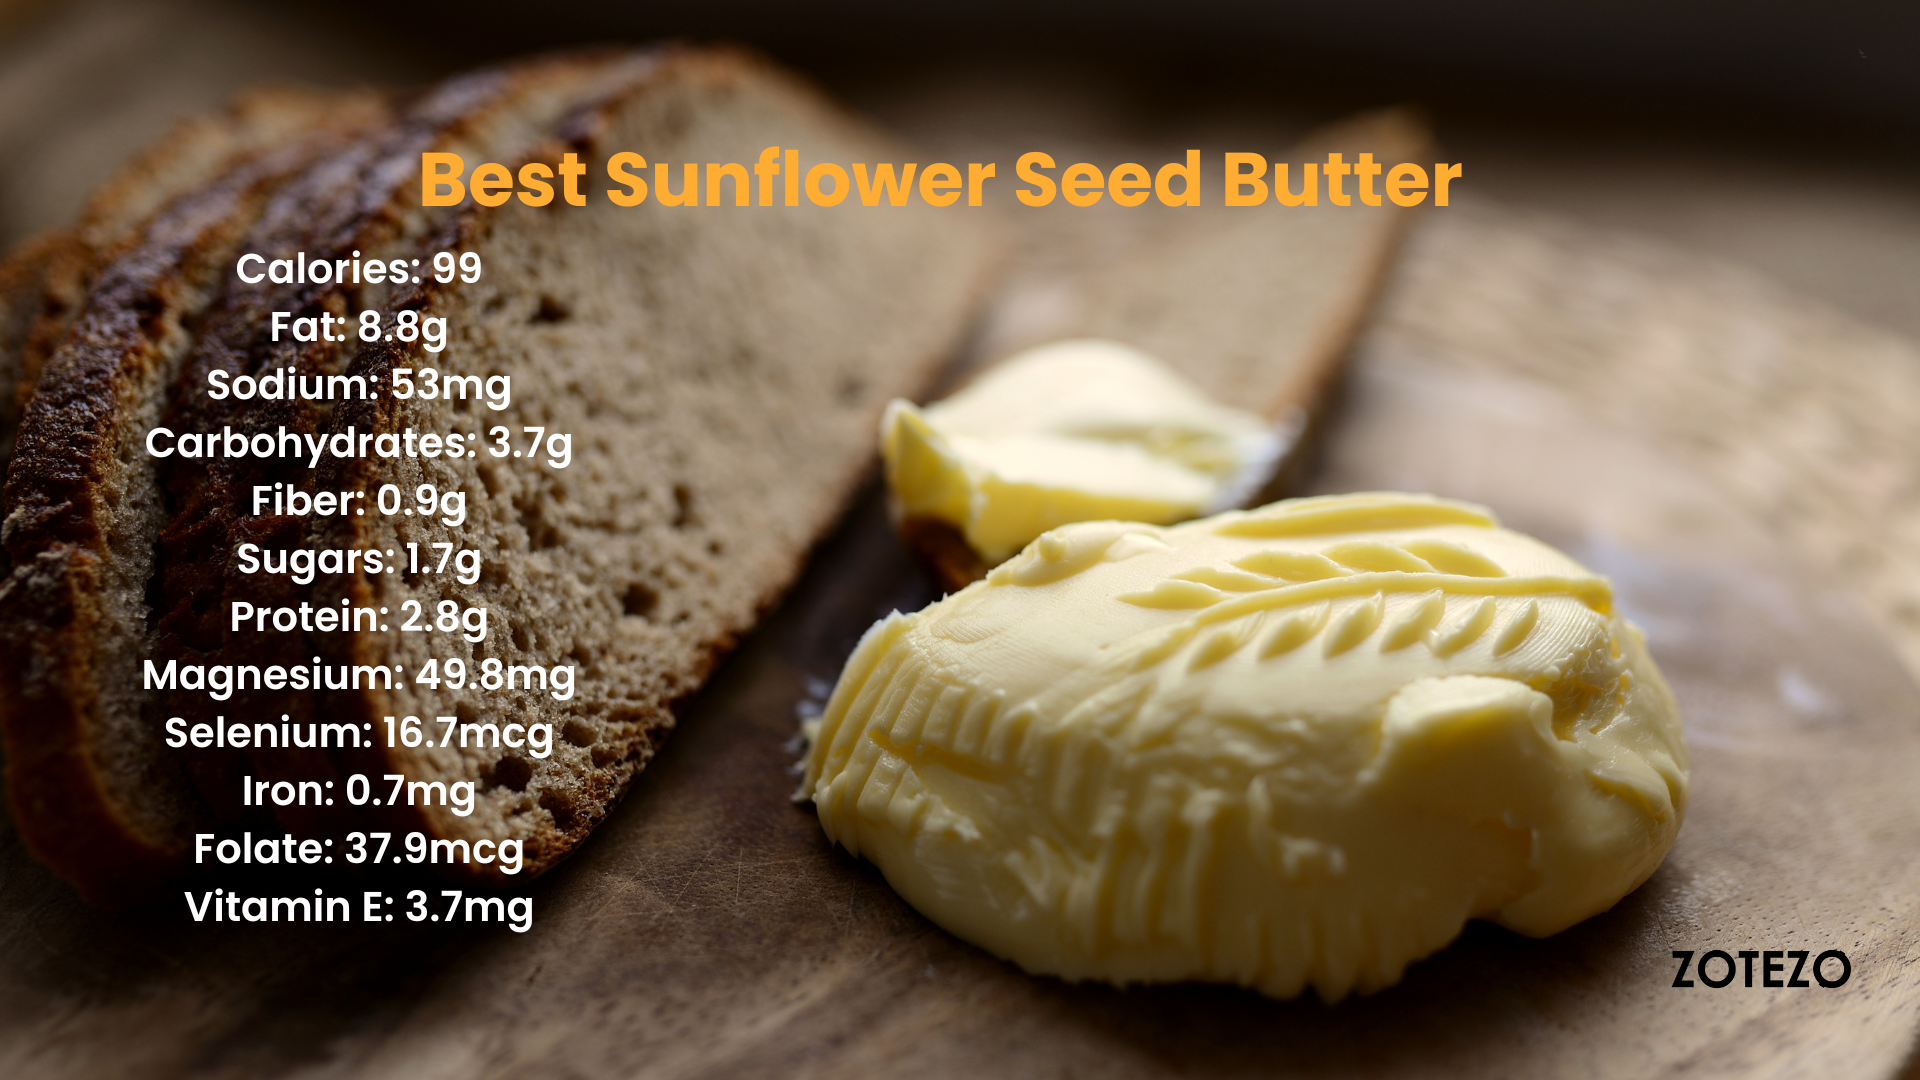 Sunflower Seed Butter in Italy